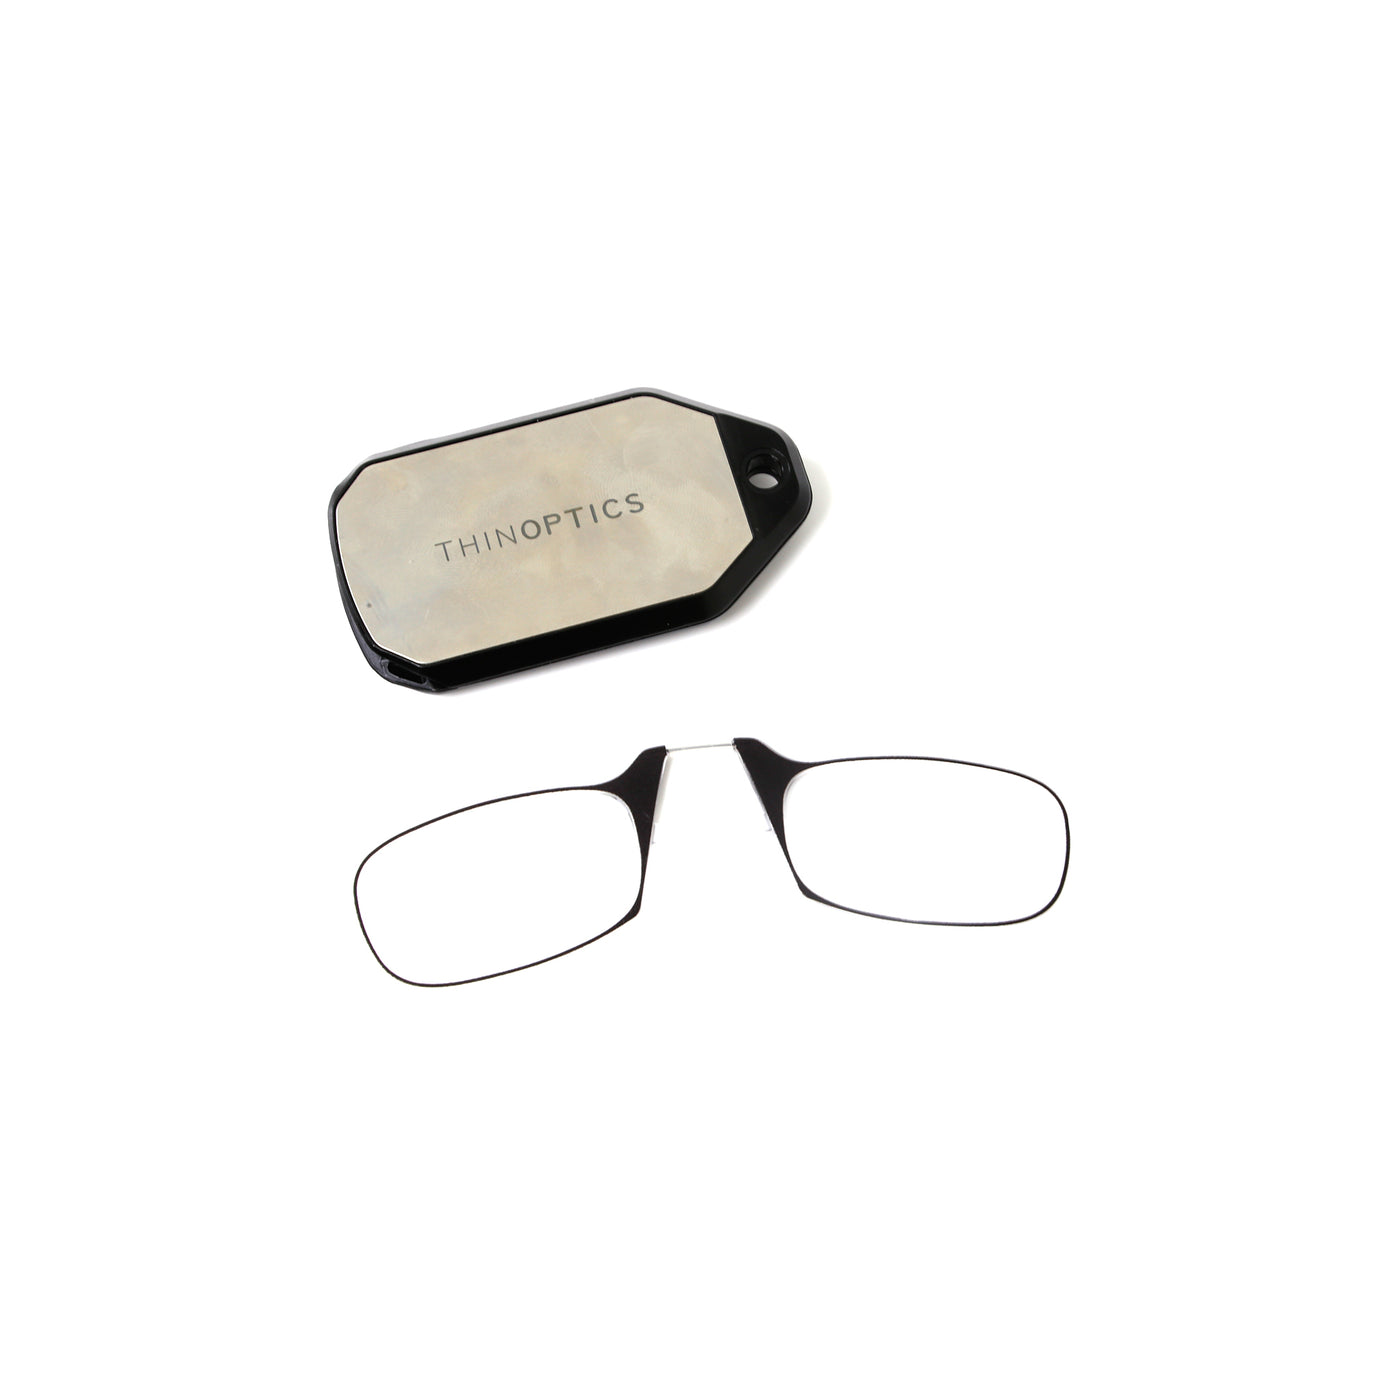 Thin Optics Key Chain Readers for Men/Women | Reading Glasses - Vision Express Optical Philippines